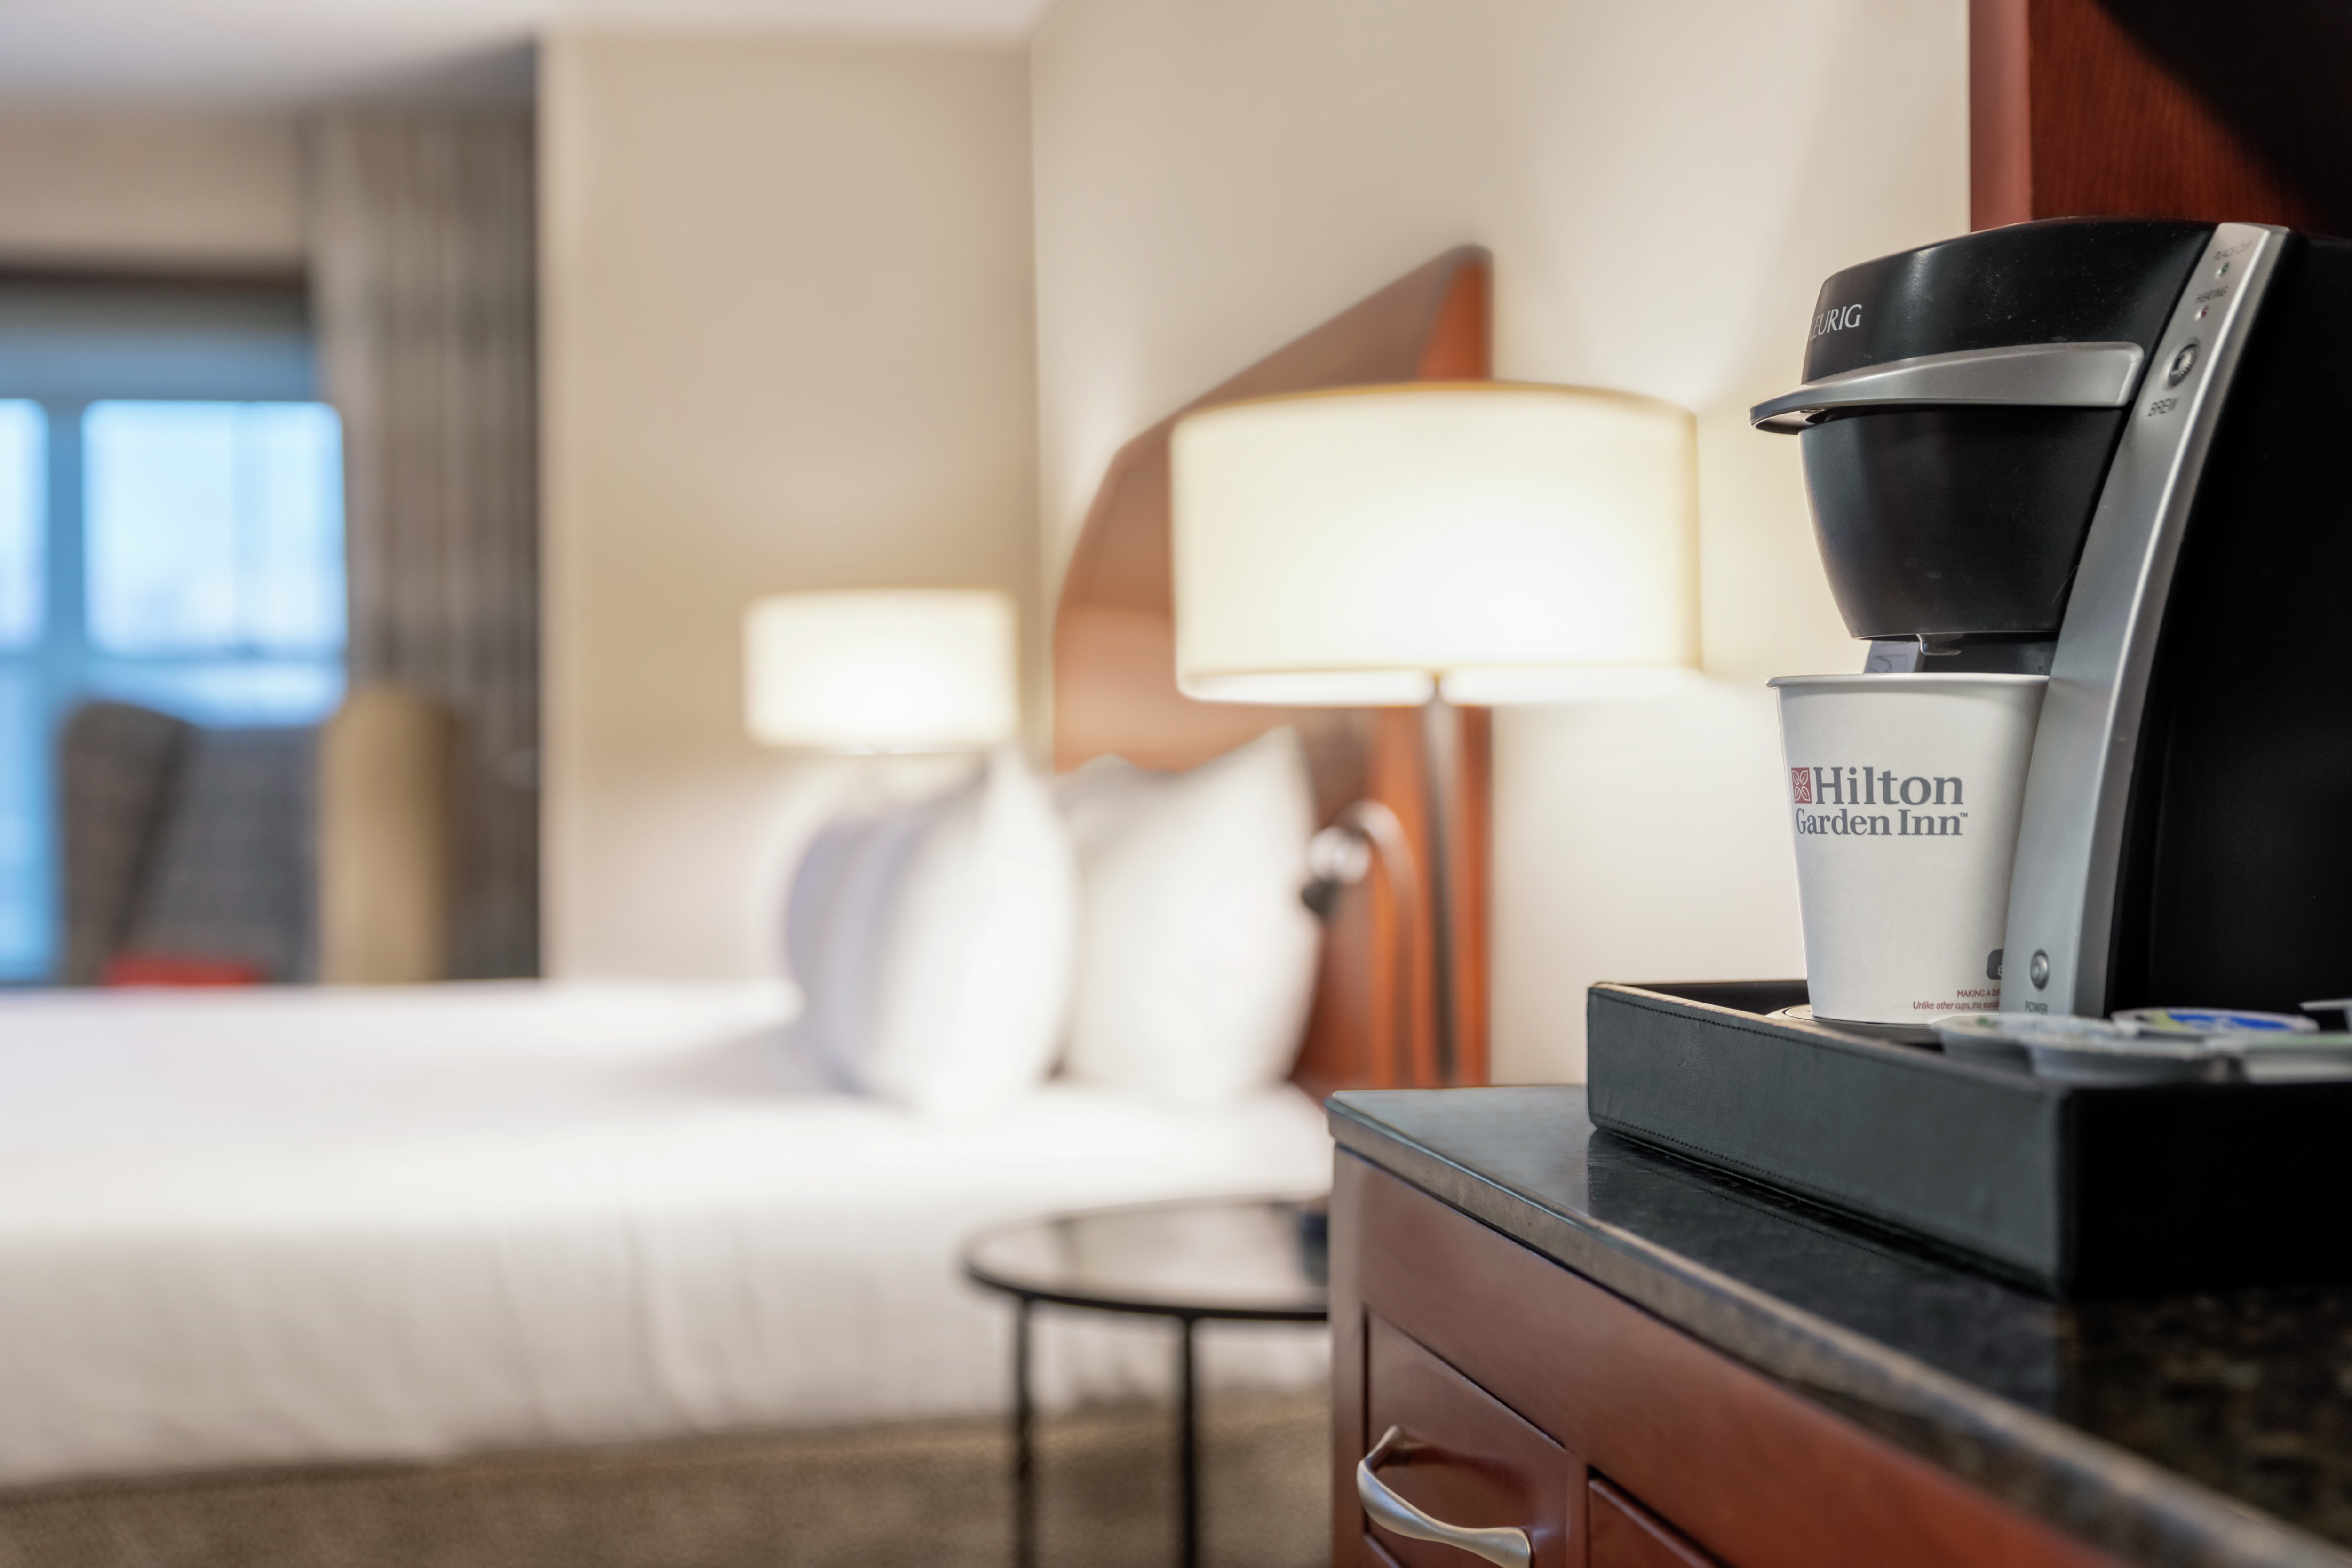 Convenient in-room coffee maker to brew delicious coffee each morning.